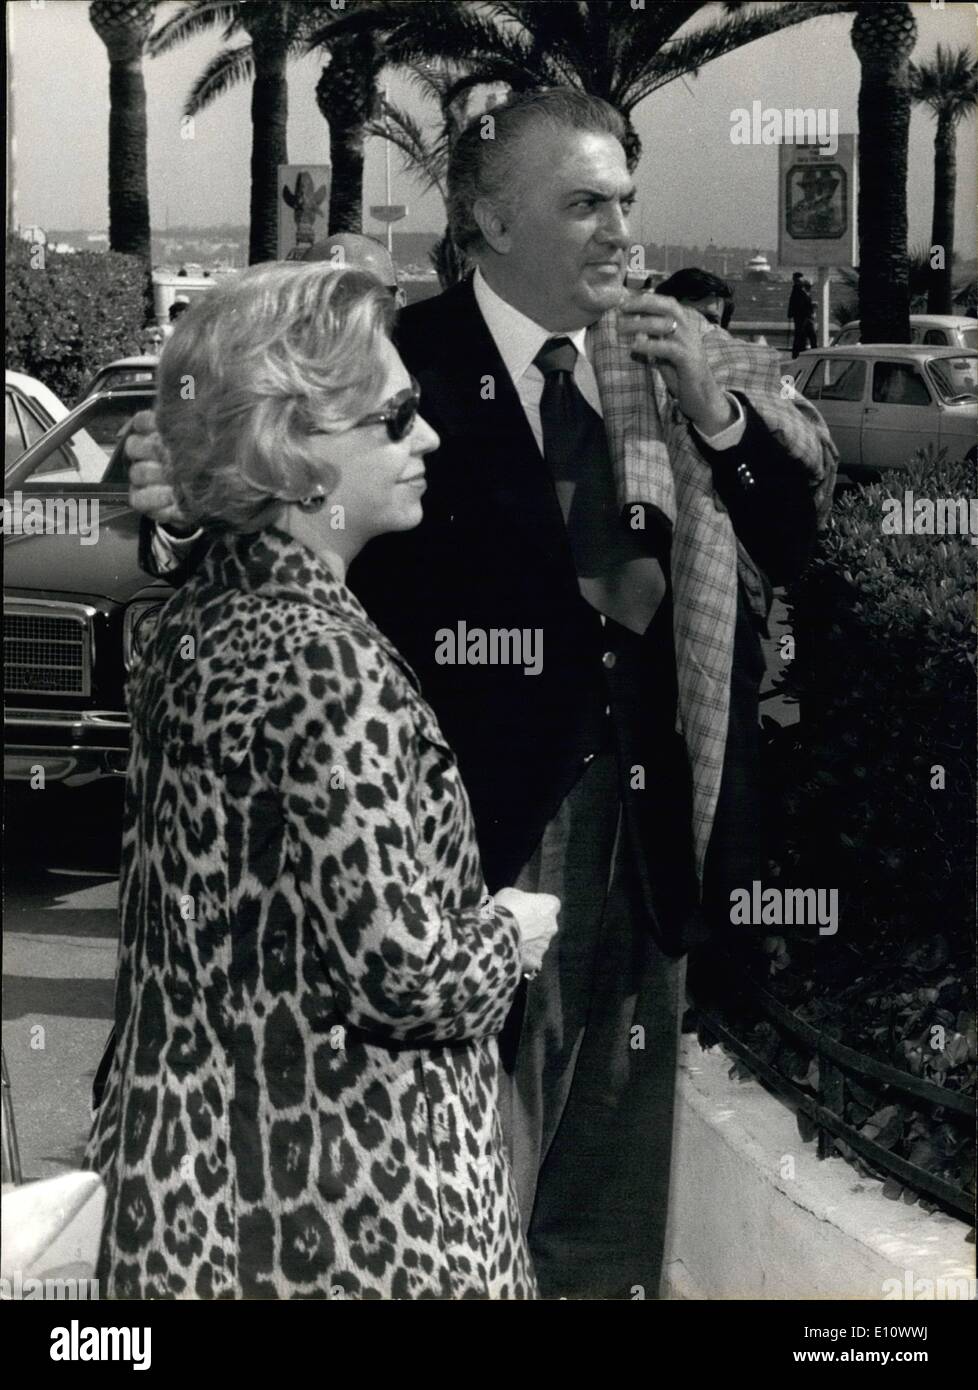 May 05, 1974 - Cannes Film Festival Opens: The Annual Film Festival Opened At Cannes, French Riviera, Yesterday. Photo shows Frederico Fellini Pictured With His Wife, Italian Actress Guiletta Massina. Fellini's Film ''Amarcord'' Was The First To Be Shown On Opening Night. Stock Photo